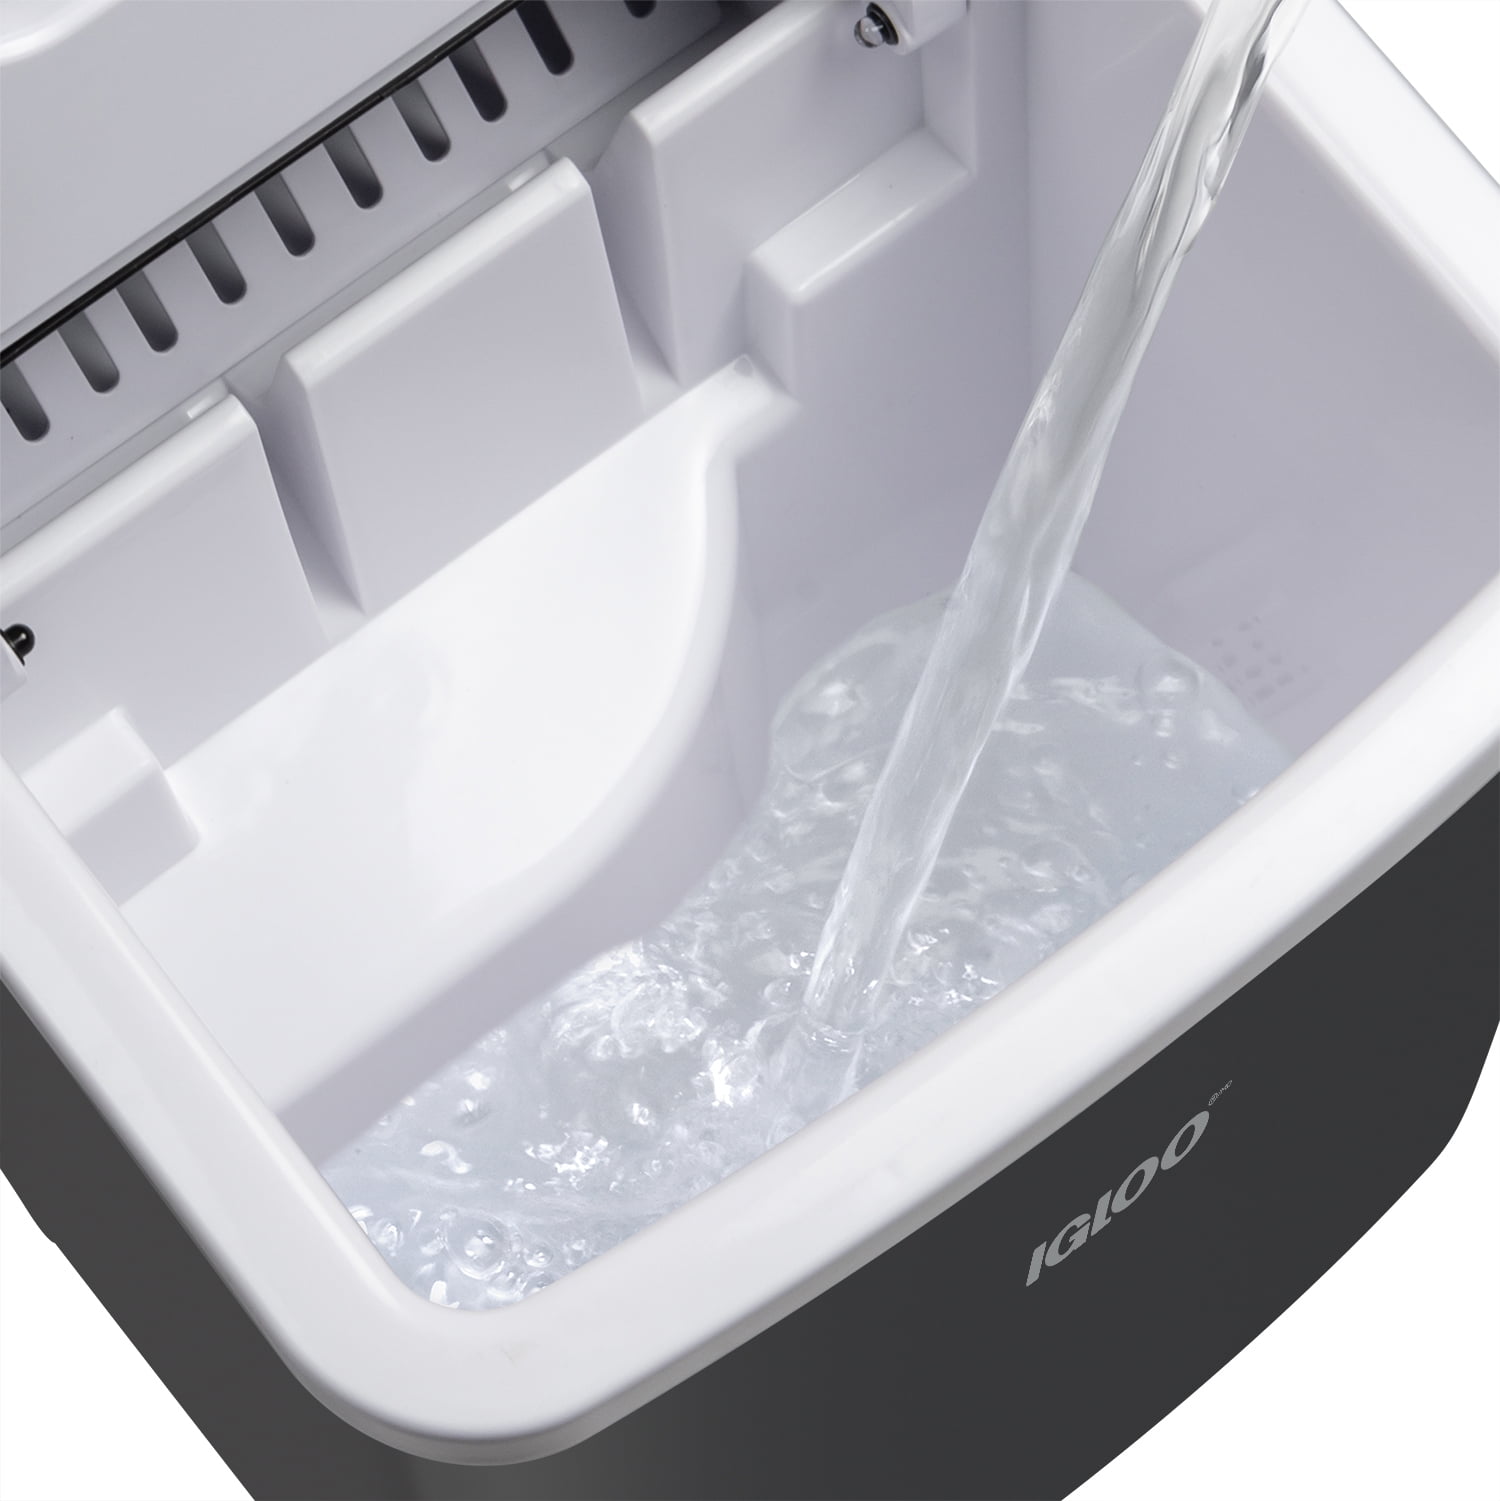 Igloo Countertop Ice Maker  Igloo Countertop Ice Maker Review-Unboxing 